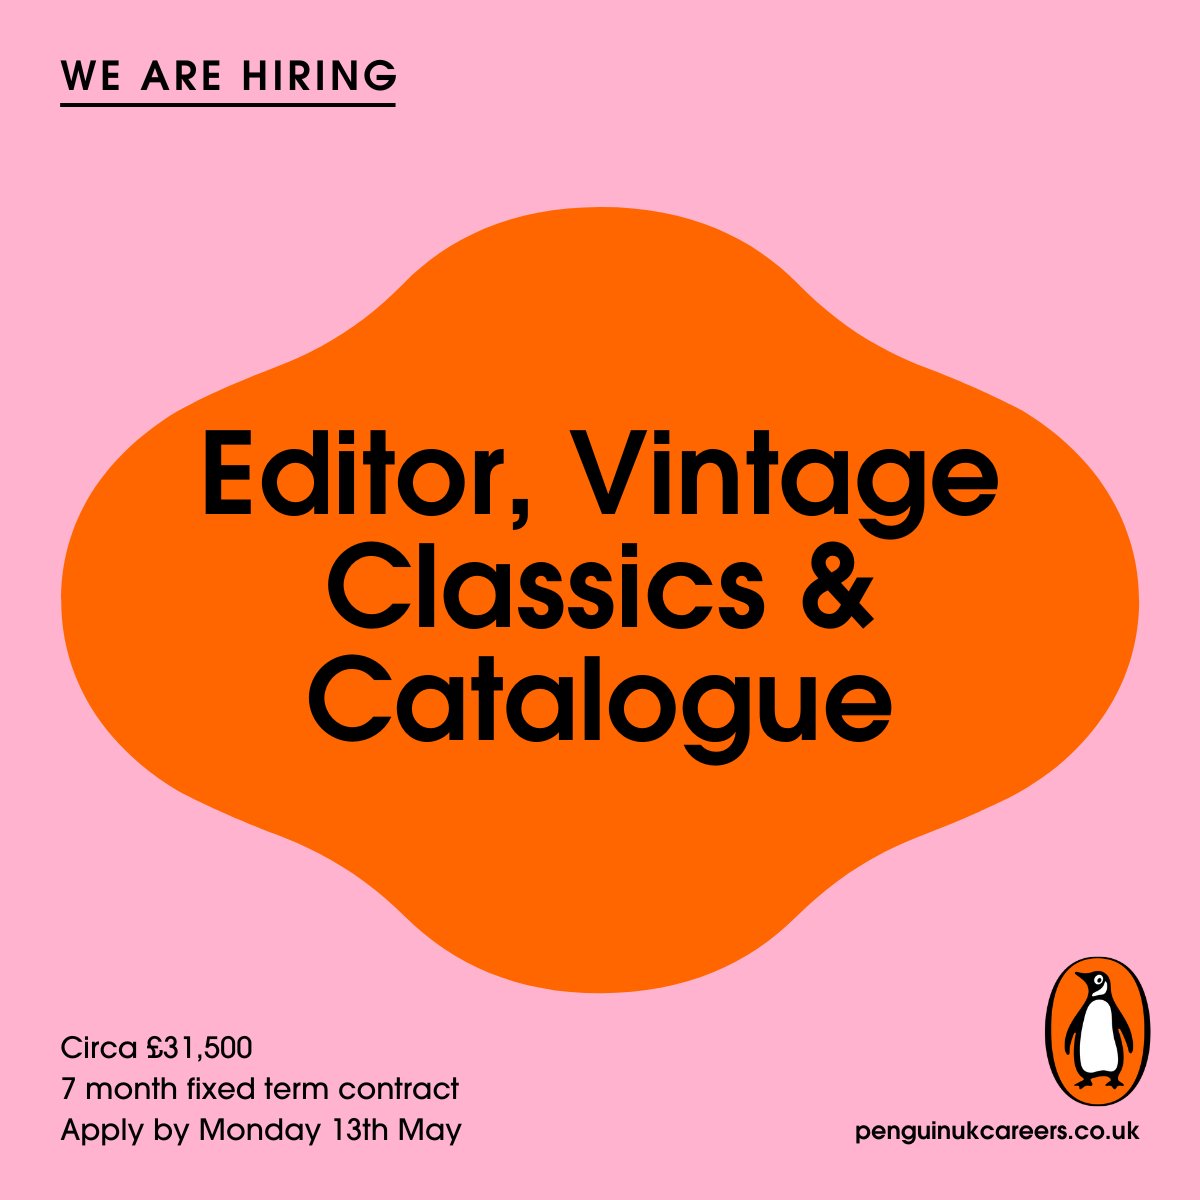 Are you a self-starter with an intricate understanding of editorial processes? Ready to pitch your ideas? We have a rare opportunity for an organised and creatively-driven Editor to temporarily join our Classics and Catalogue team in Vintage Info: shorturl.at/cflr6